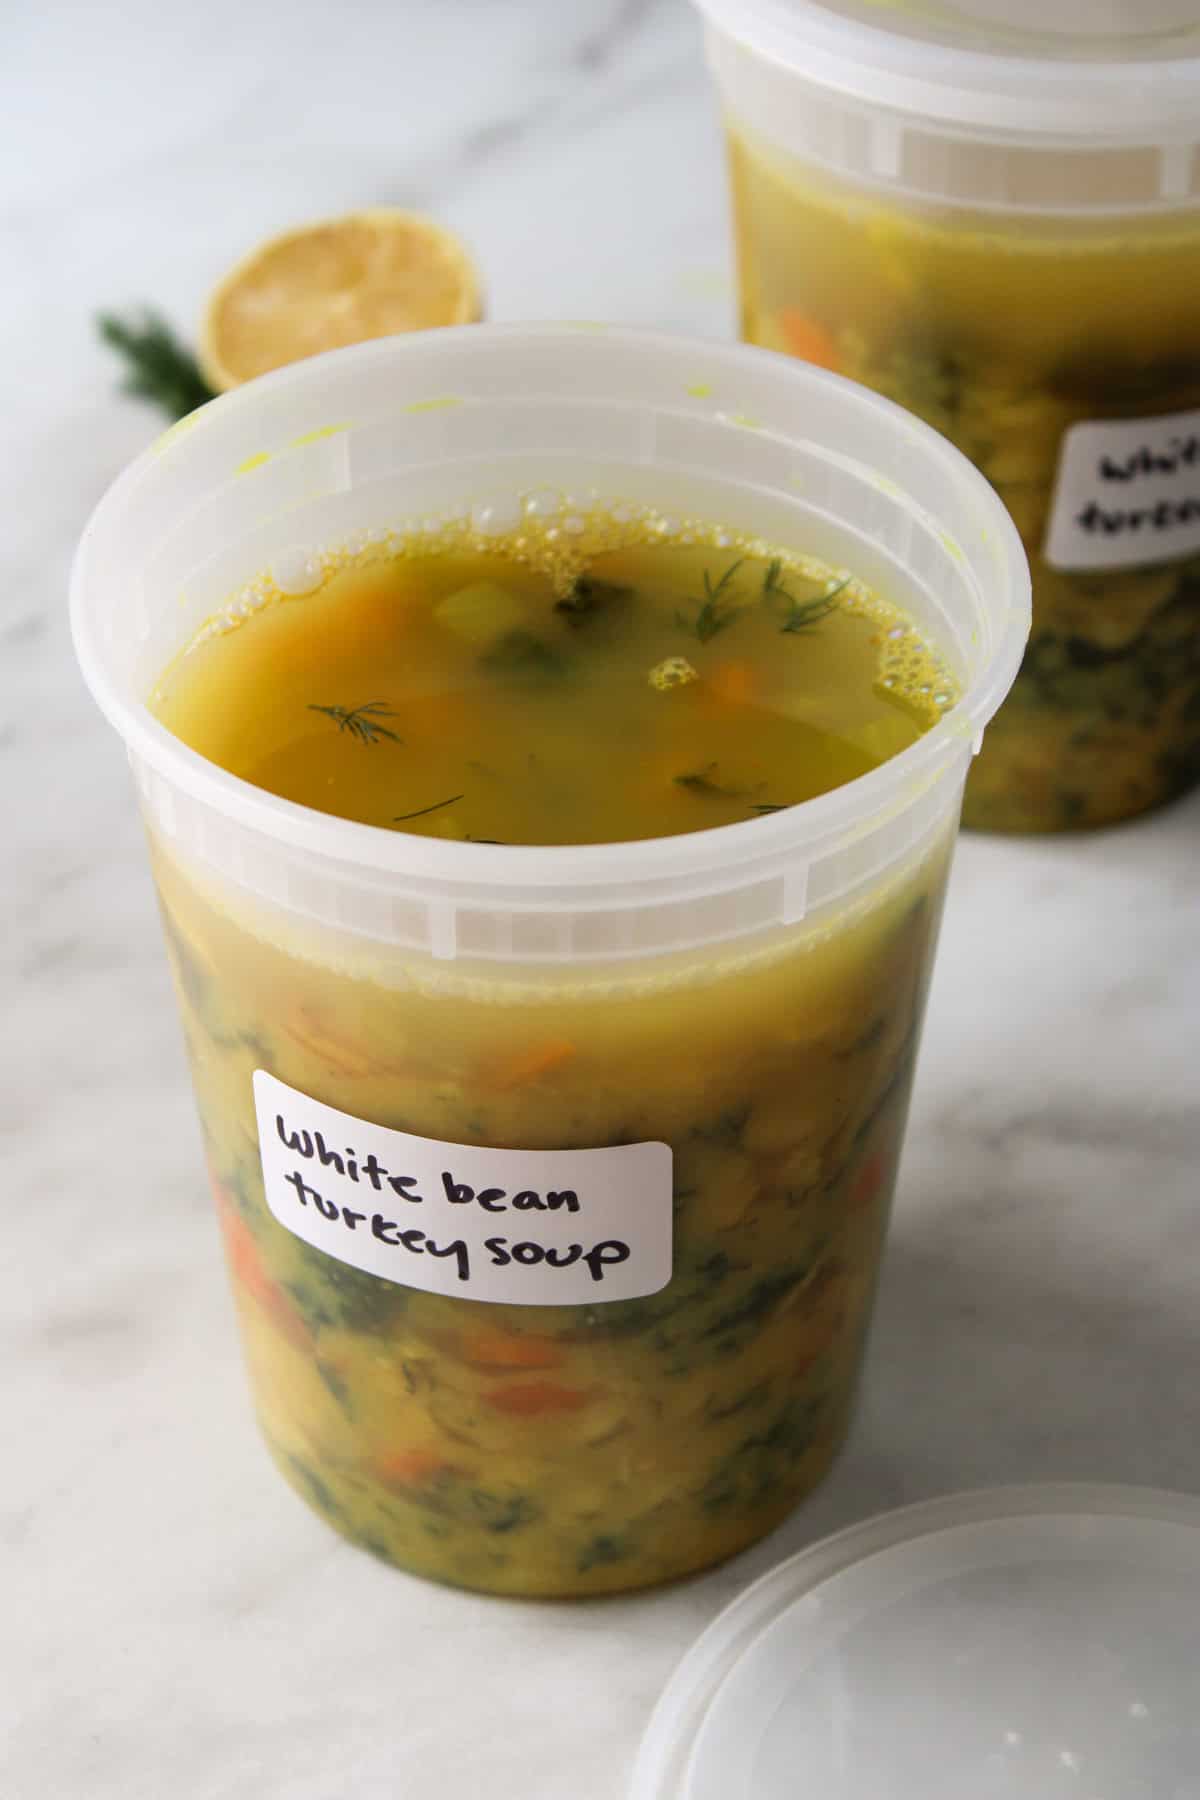 soup in a plastic quart container with a white label reading "white bean turkey soup"